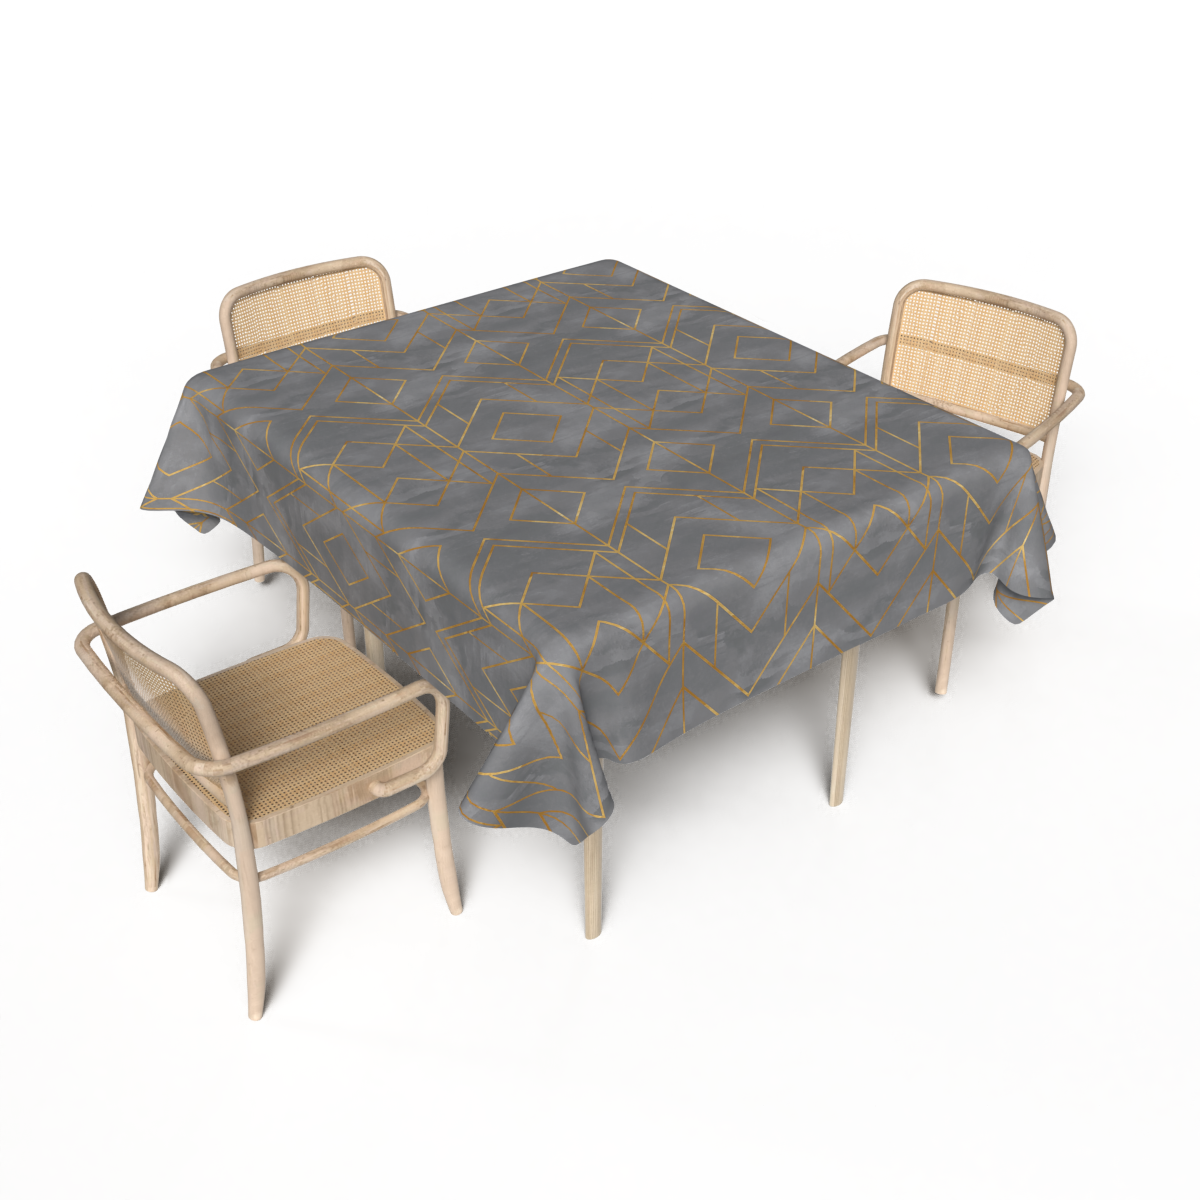 Table cloth - multiple sizes - ROM569